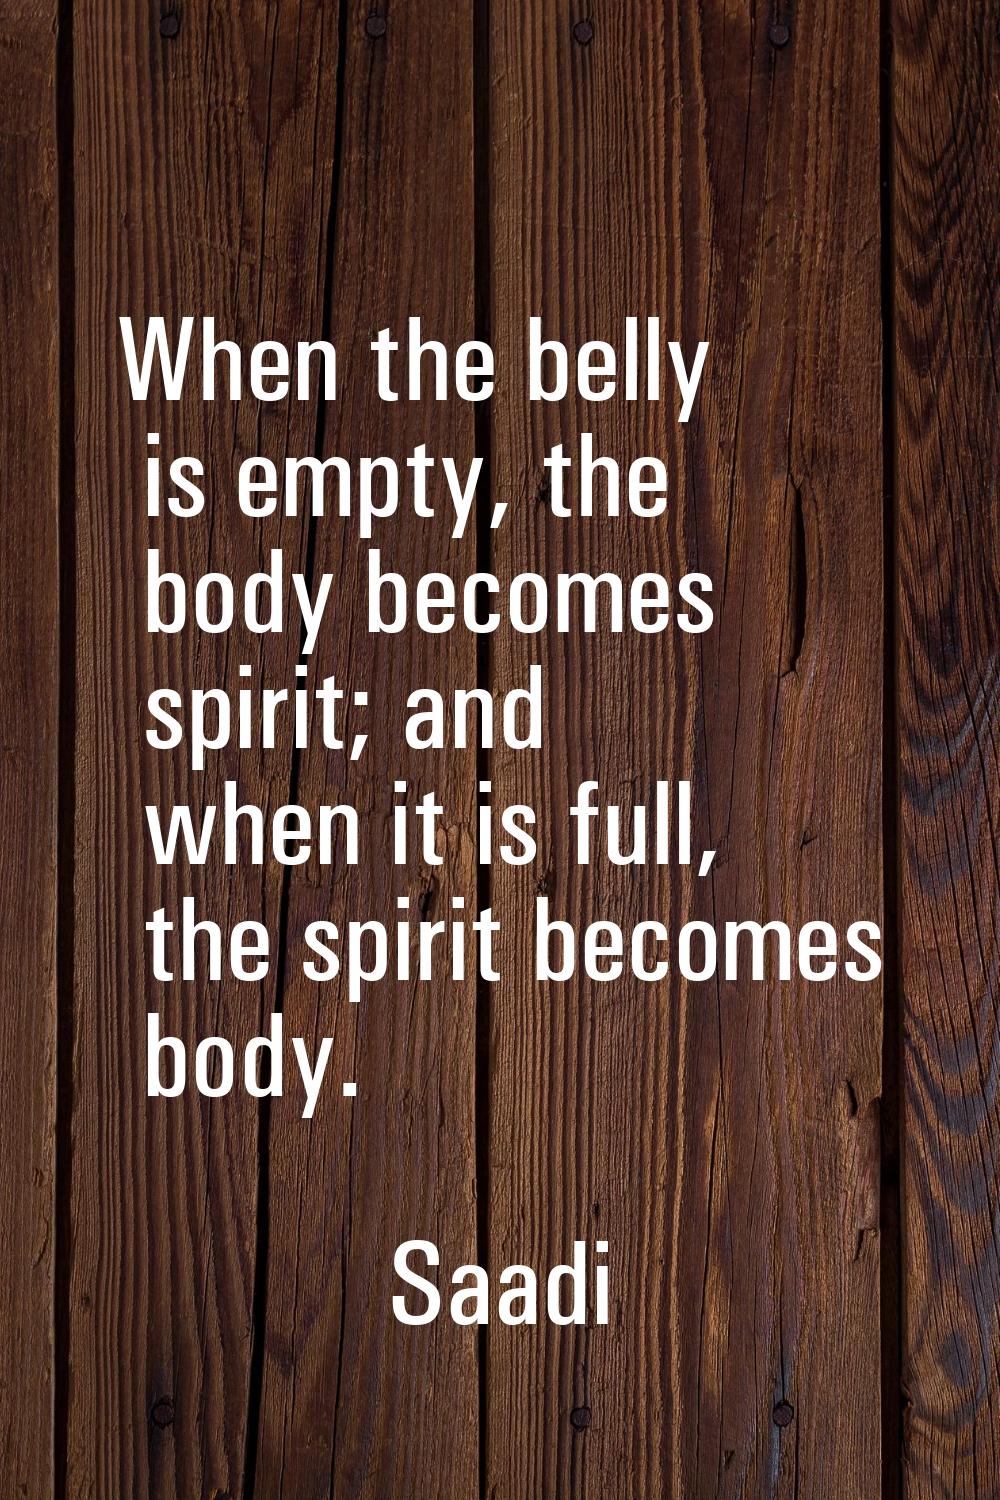 When the belly is empty, the body becomes spirit; and when it is full, the spirit becomes body.